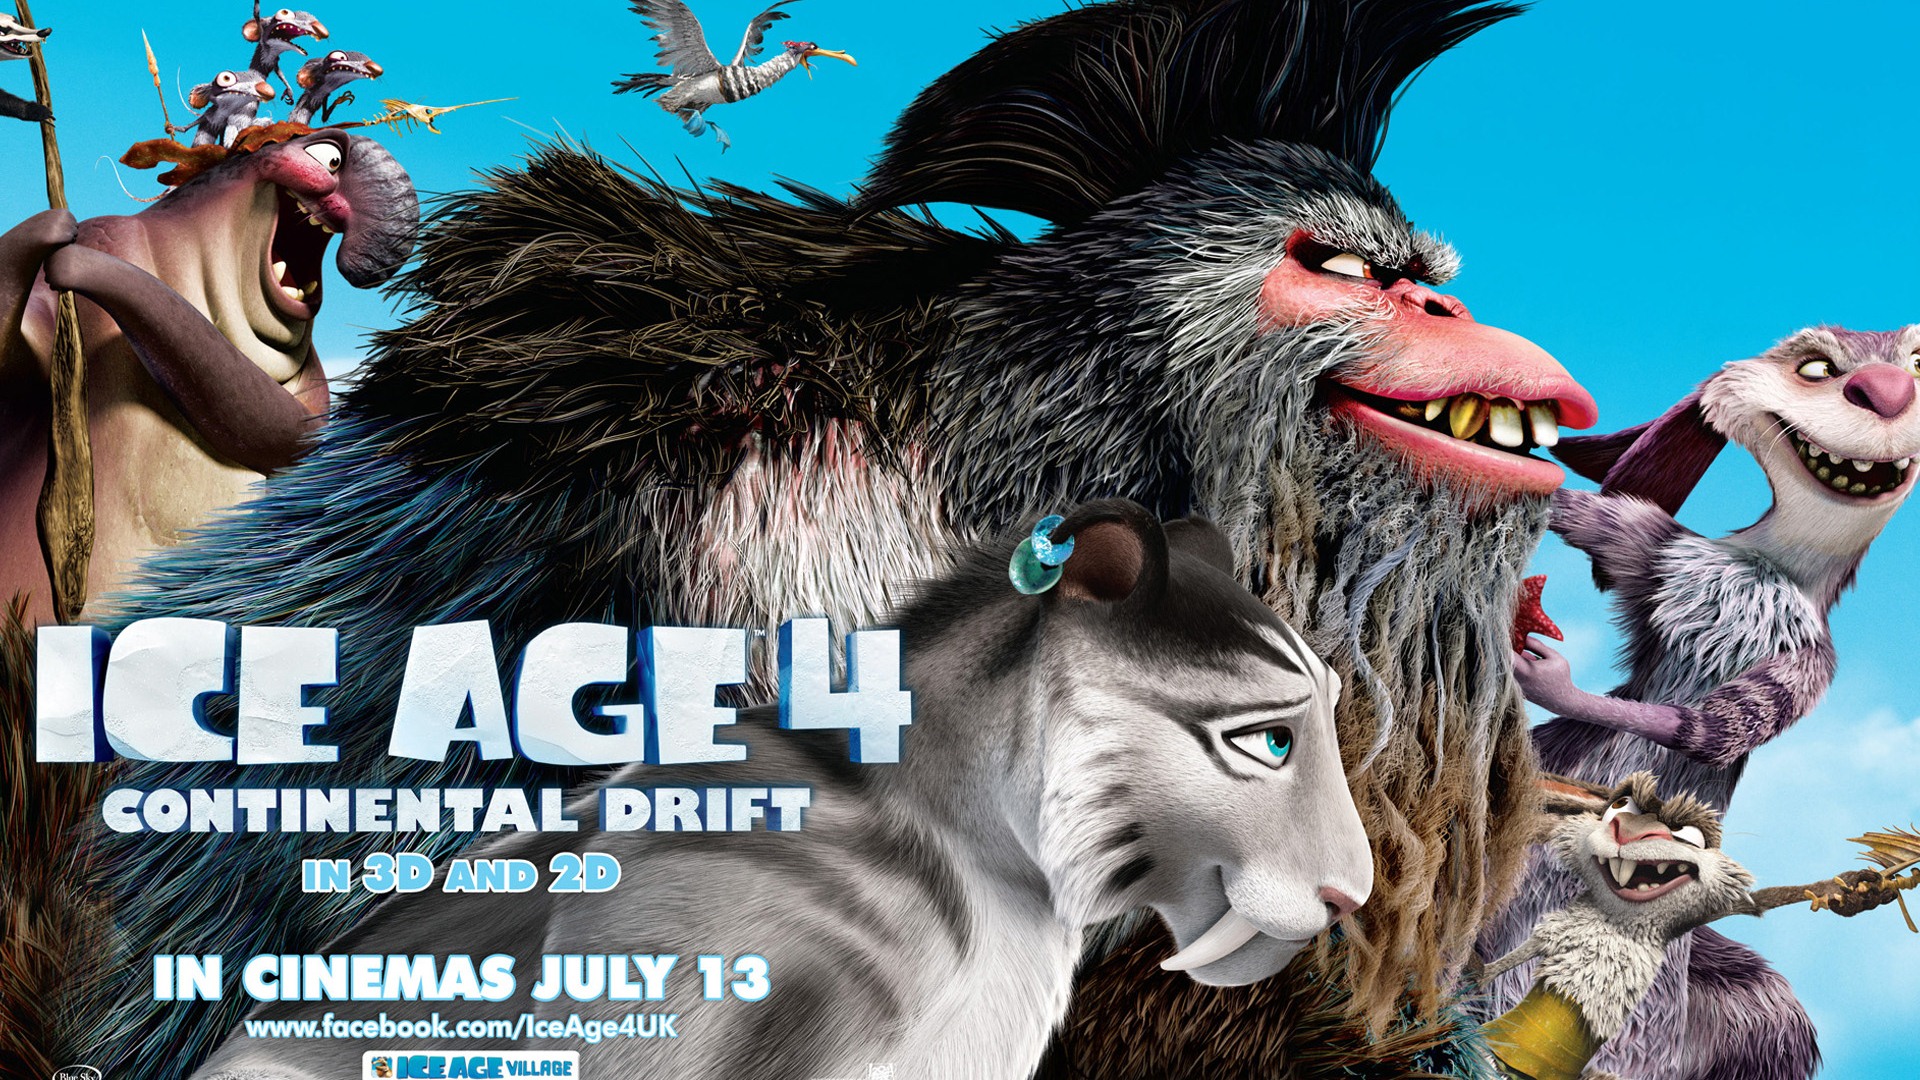 Ice Age 4: Continental Drift HD wallpapers #7 - 1920x1080